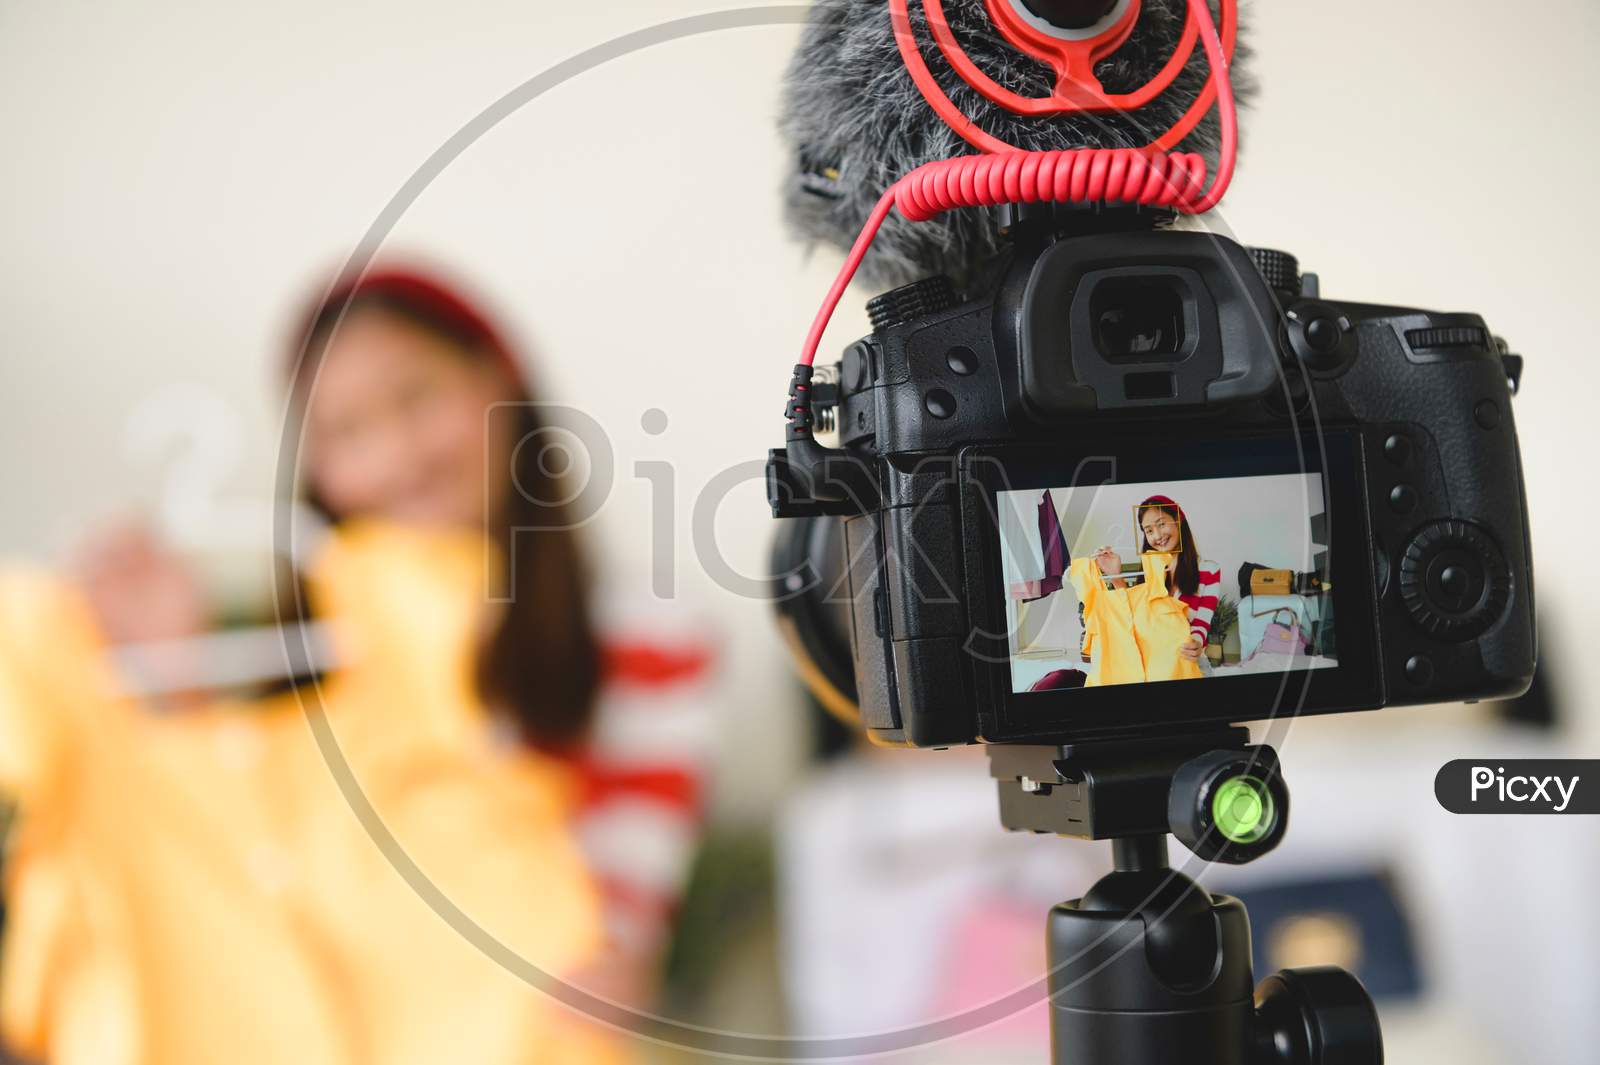 Professional Dslr Digital Camera Film Video Live With Vlogger Blogger Interview Background. Woman Coaching Trading And Review Clothing Product. Business Presentation Training Class. People Lifestyle